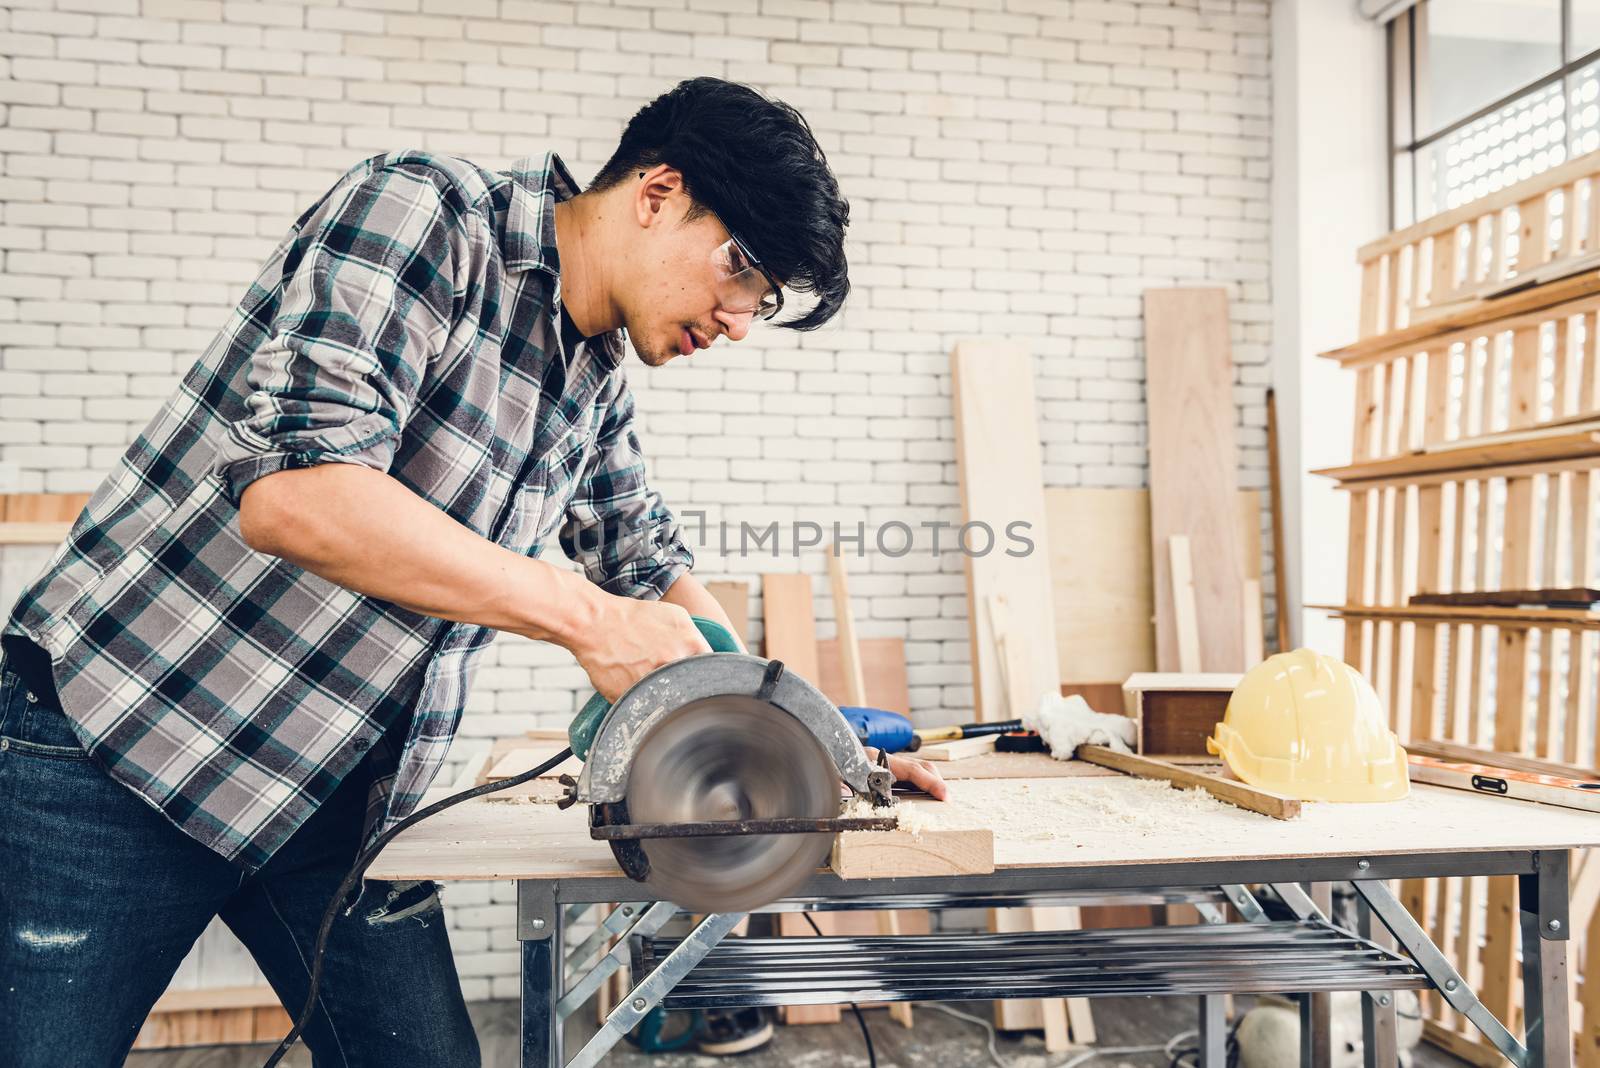 Carpenter Man is Working Timber Woodworking in Carpentry Workshops, Craftsman is Using Sawing Machine Cutting Timber Frame for Wooden Furniture in Workshop. Workmanship and Job Occupation Concept by MahaHeang245789